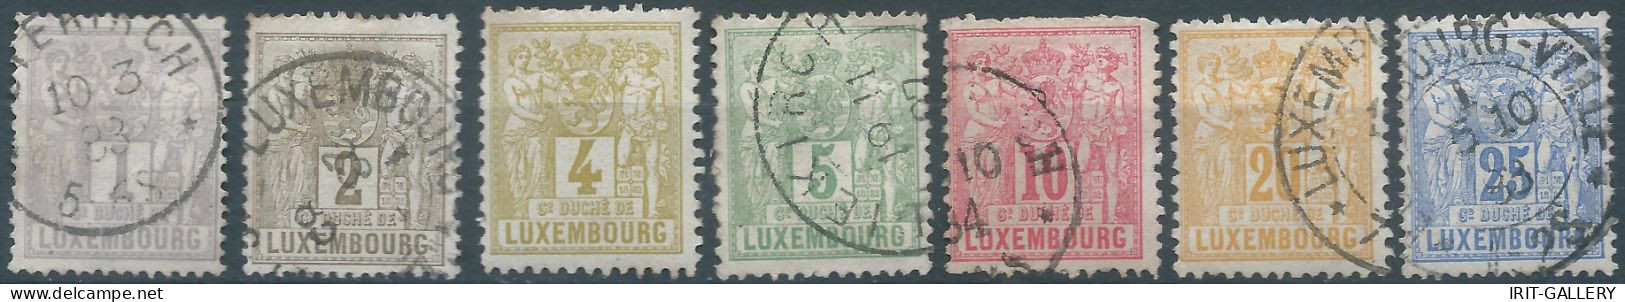 Lussemburgo - Luxembourg - 1882 Definitive Issue,Obliterated - 1882 Allégorie